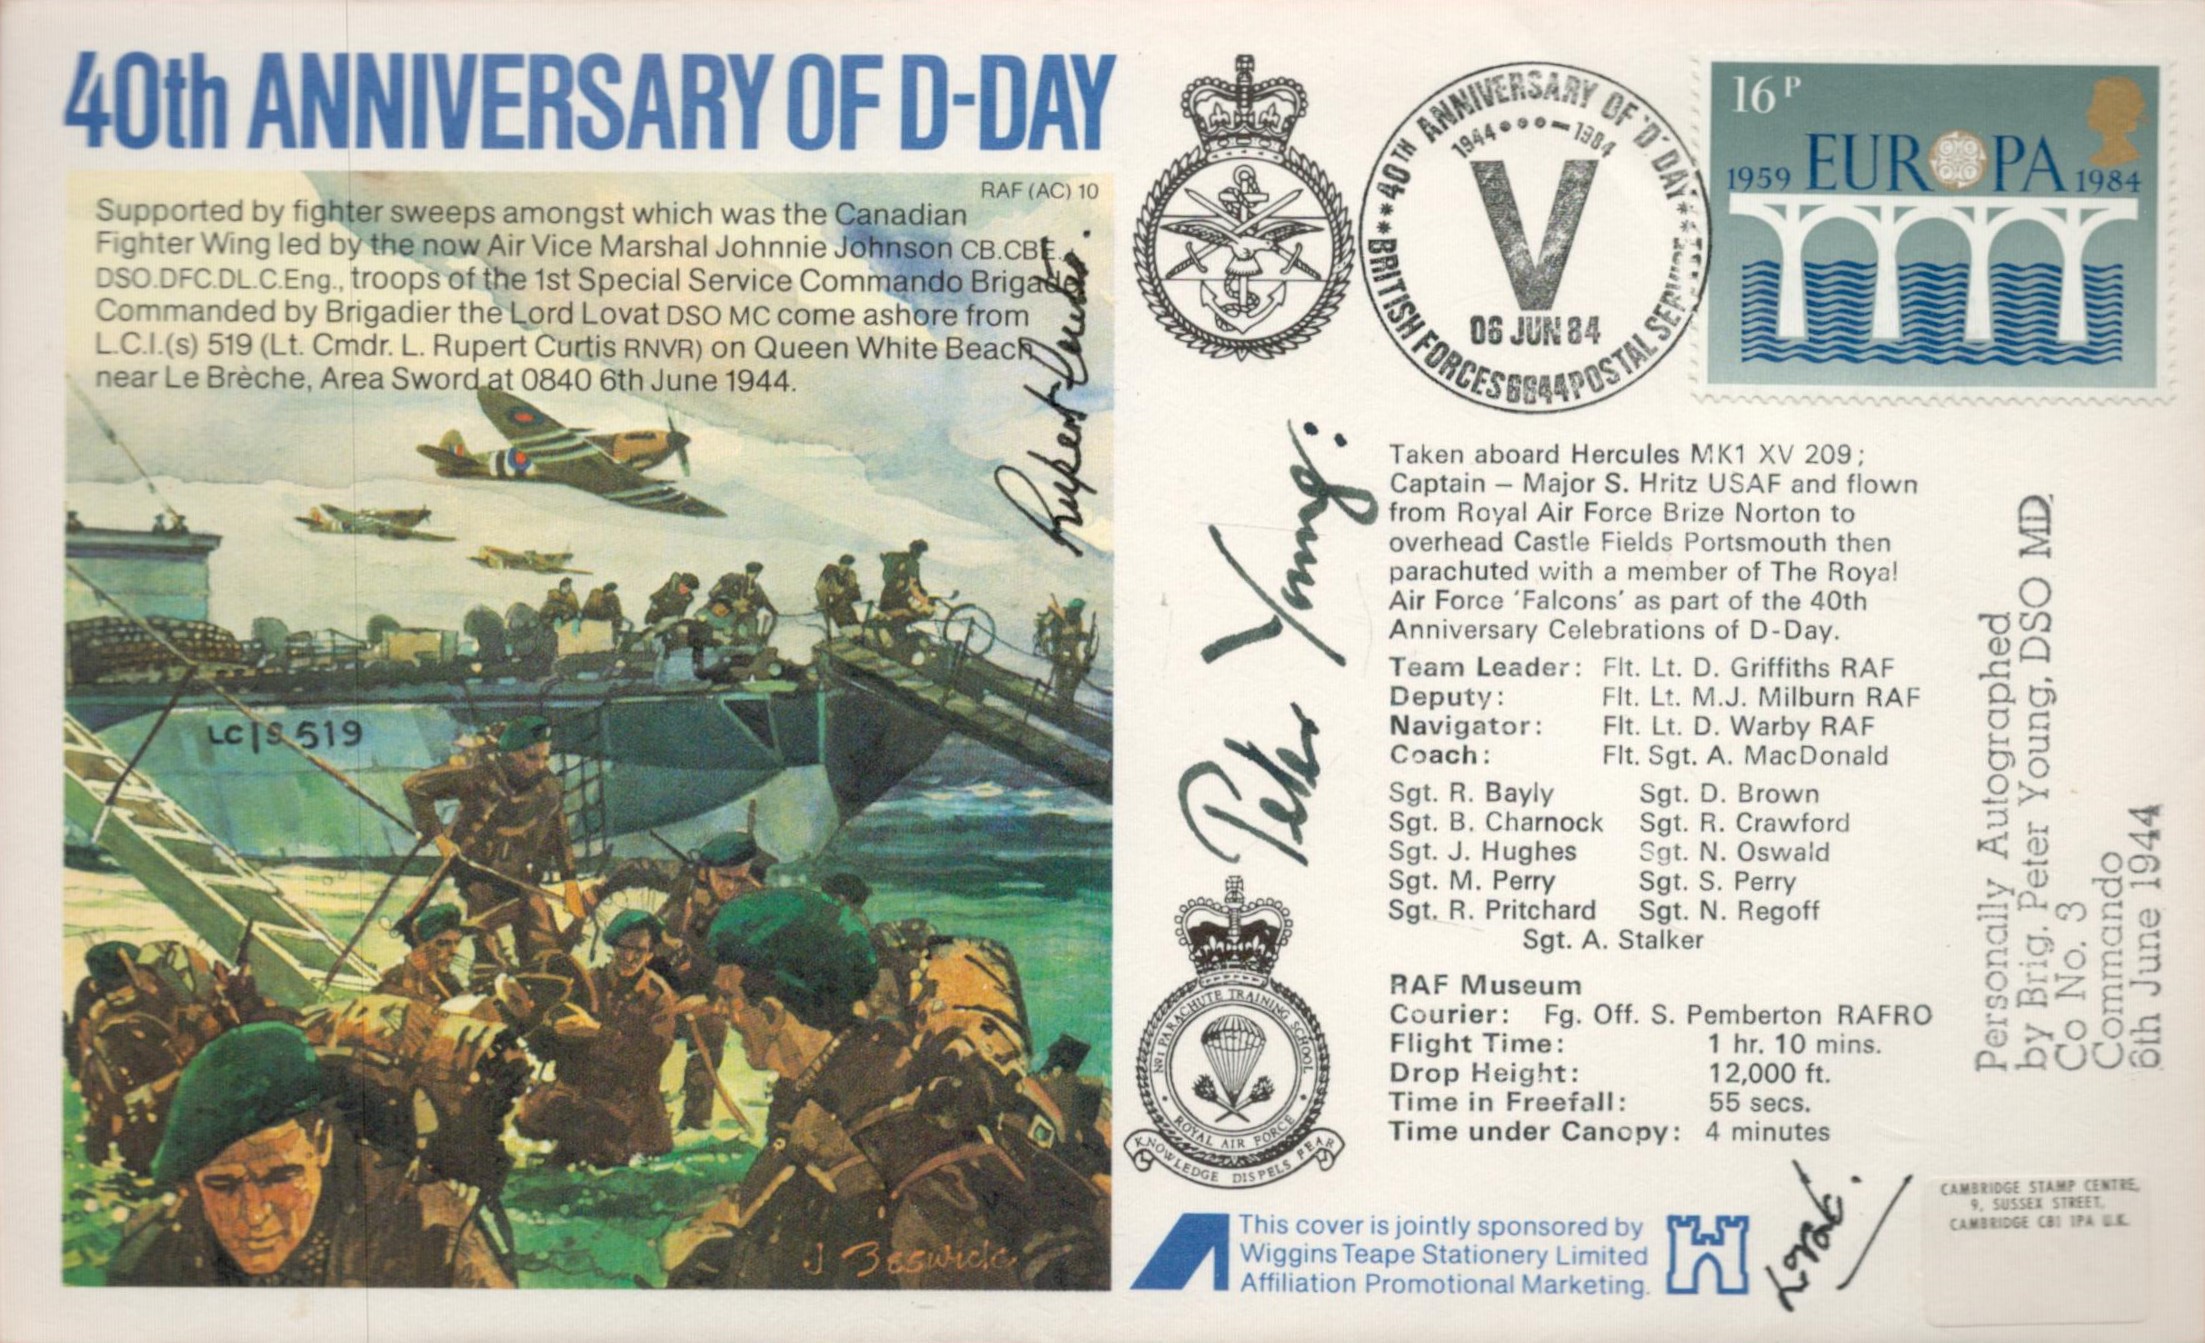 Simon Fraser, 15th Lord Lovat, Brigadier Peter Young and Rupert Curtis Signed 40th Anniversary of